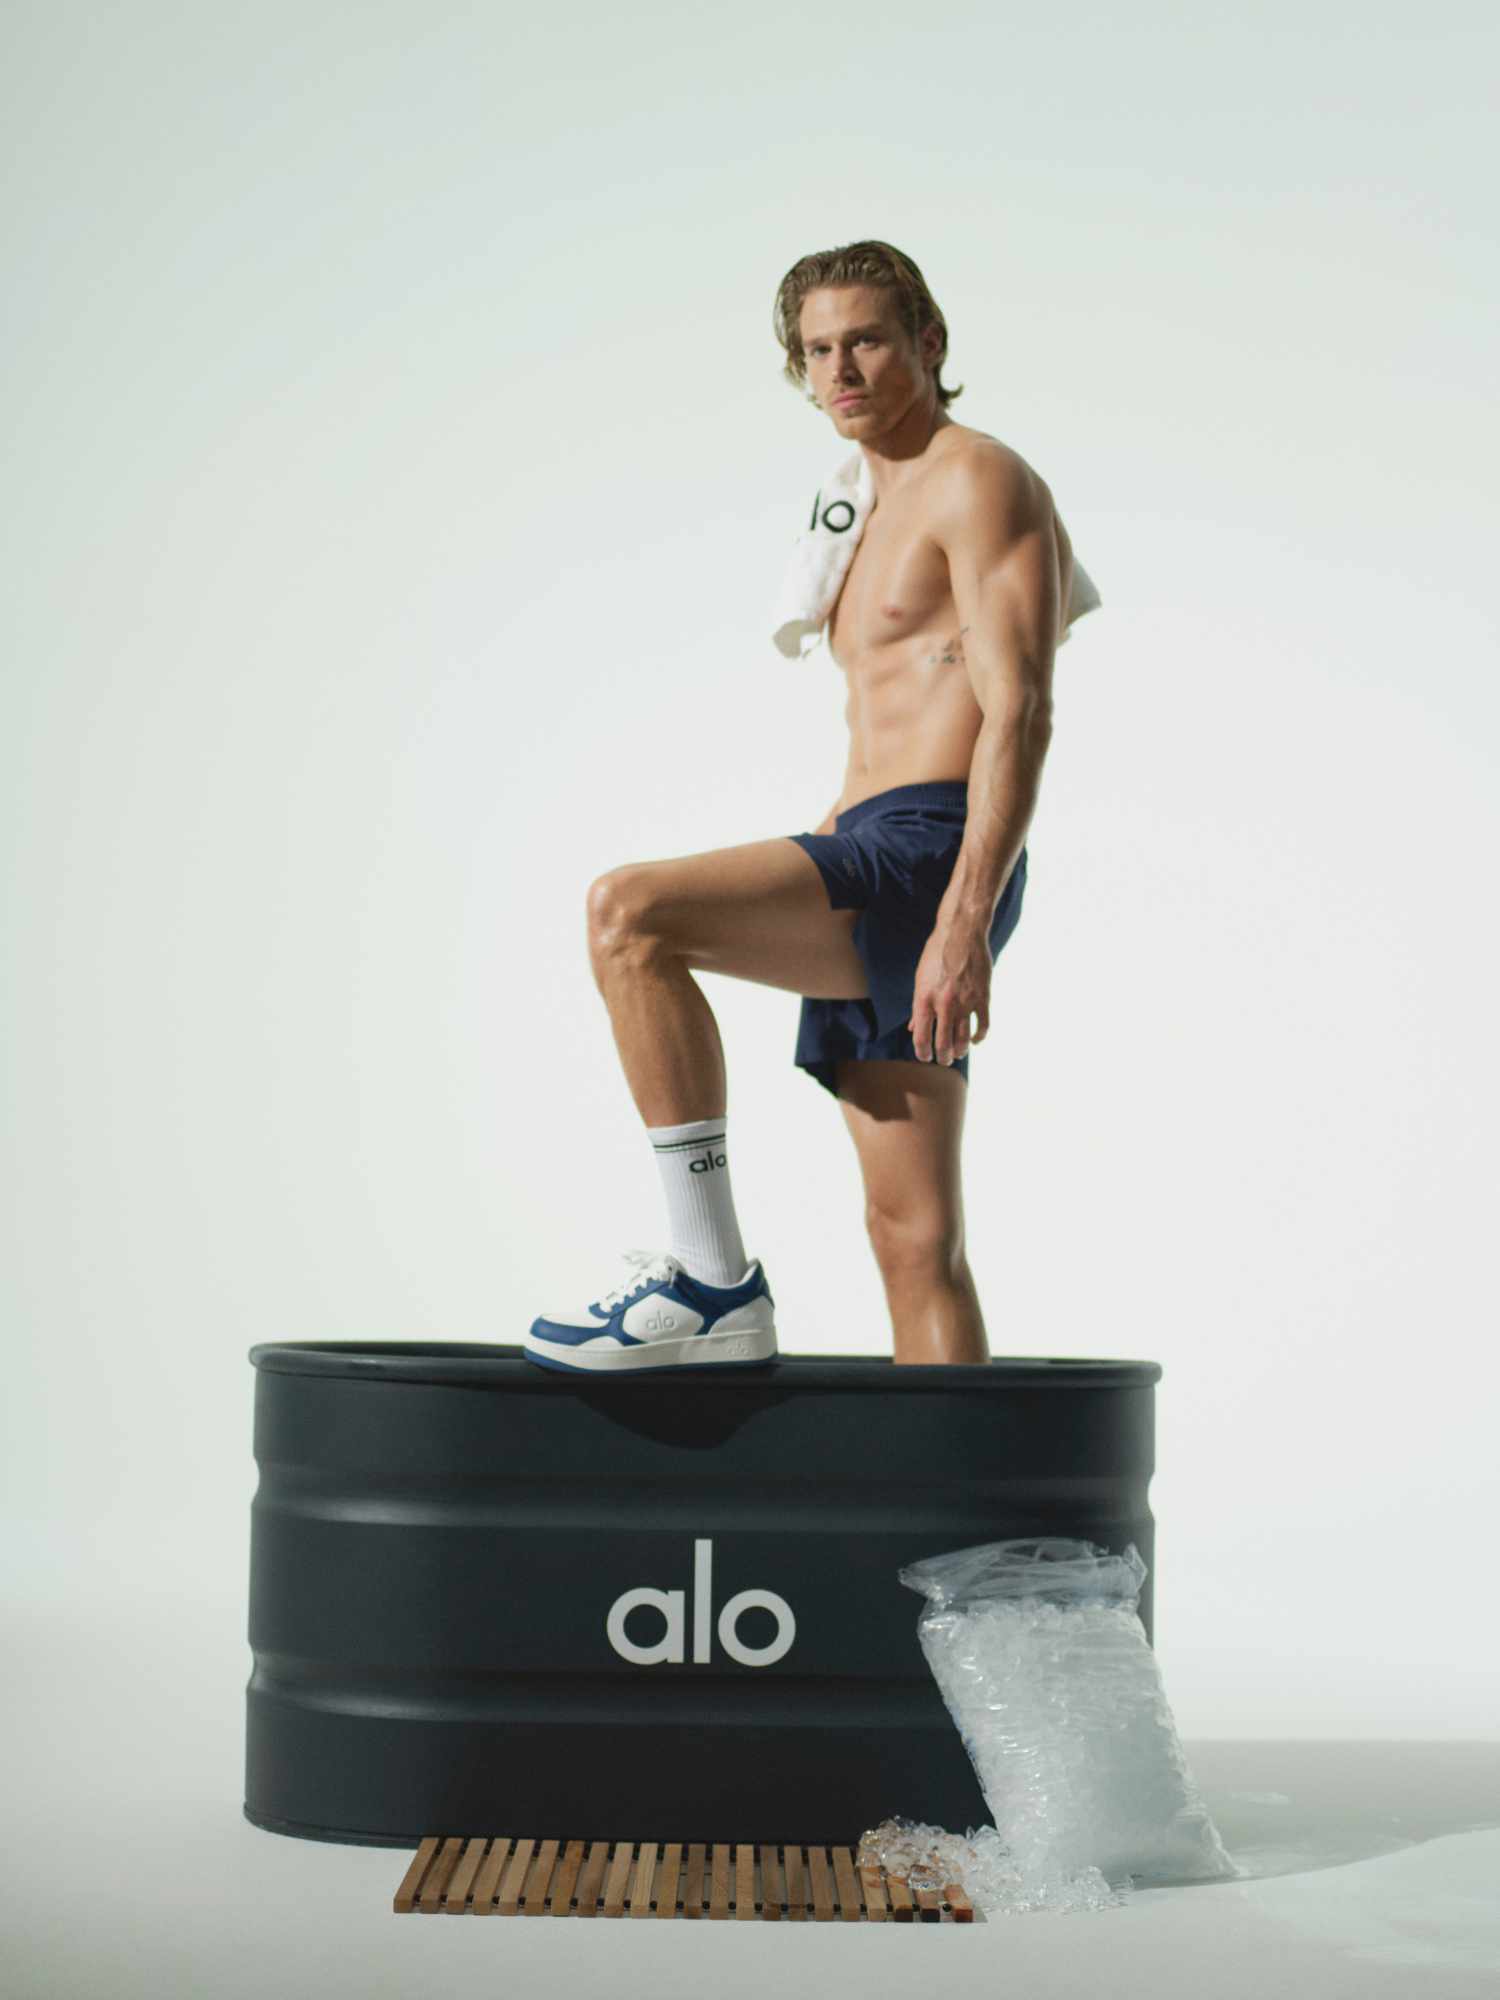 Alo Yoga's Recovery Mode Sneaker, formerly known as the X 01 shoe